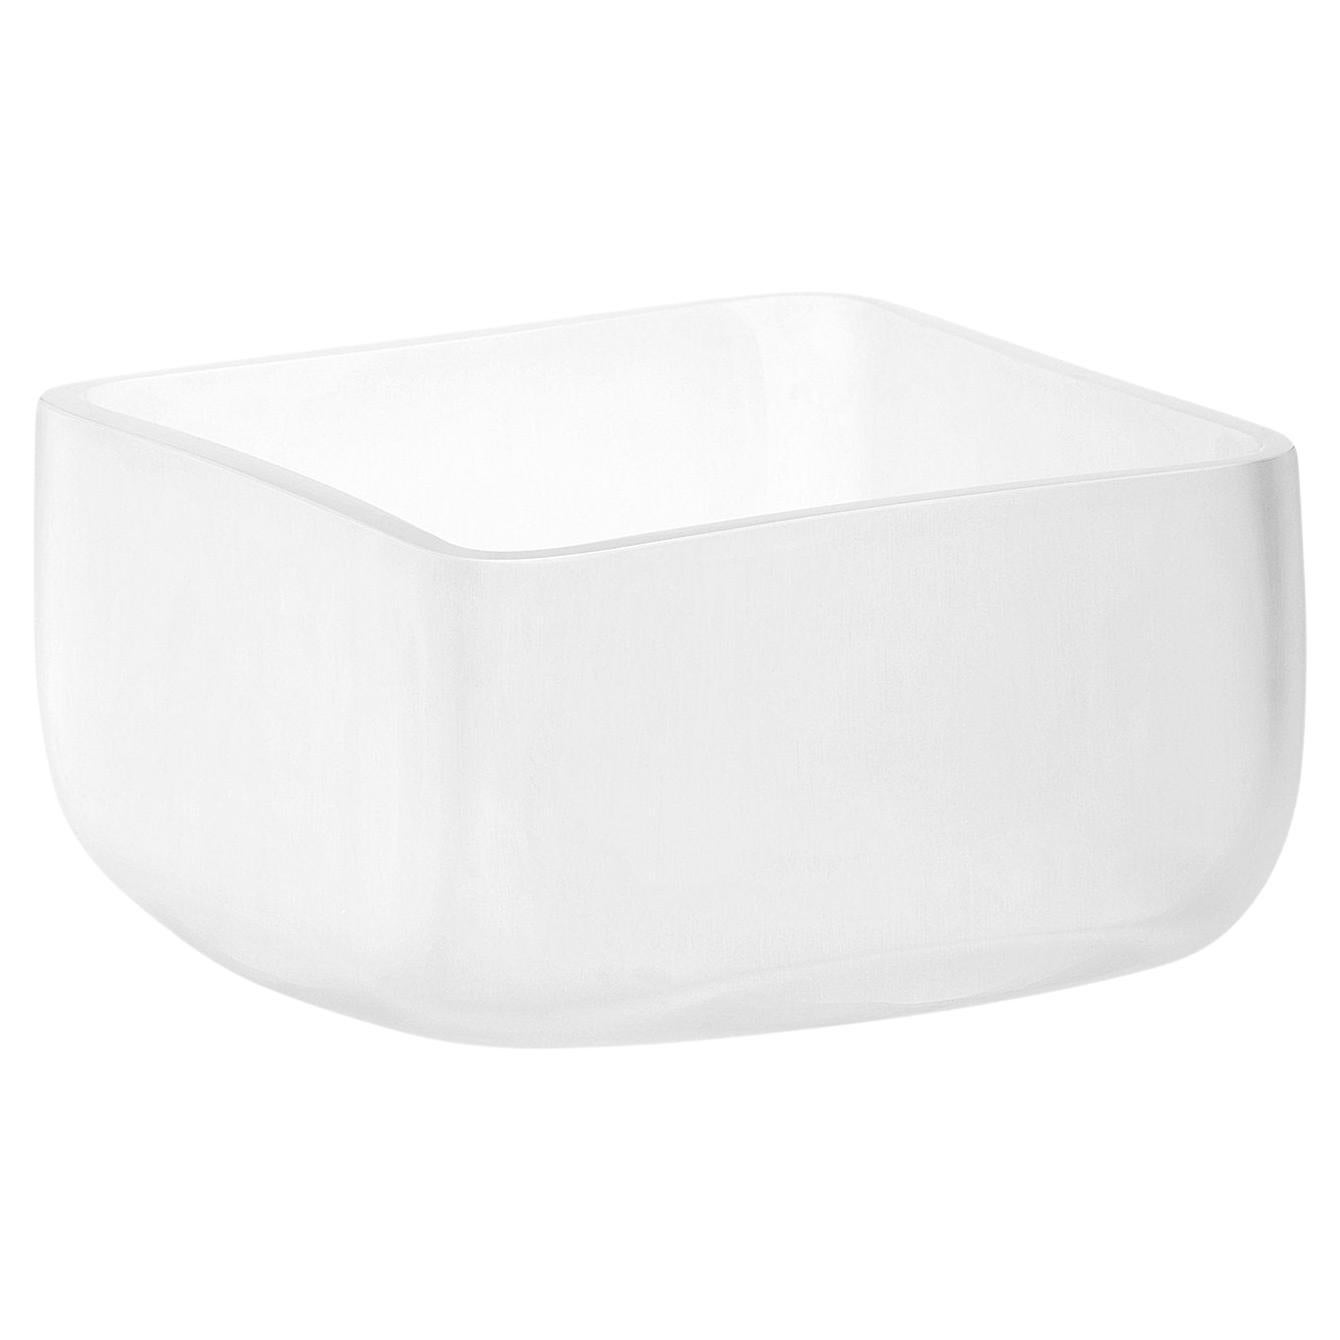 Cubes White Bowl by LPKW For Sale